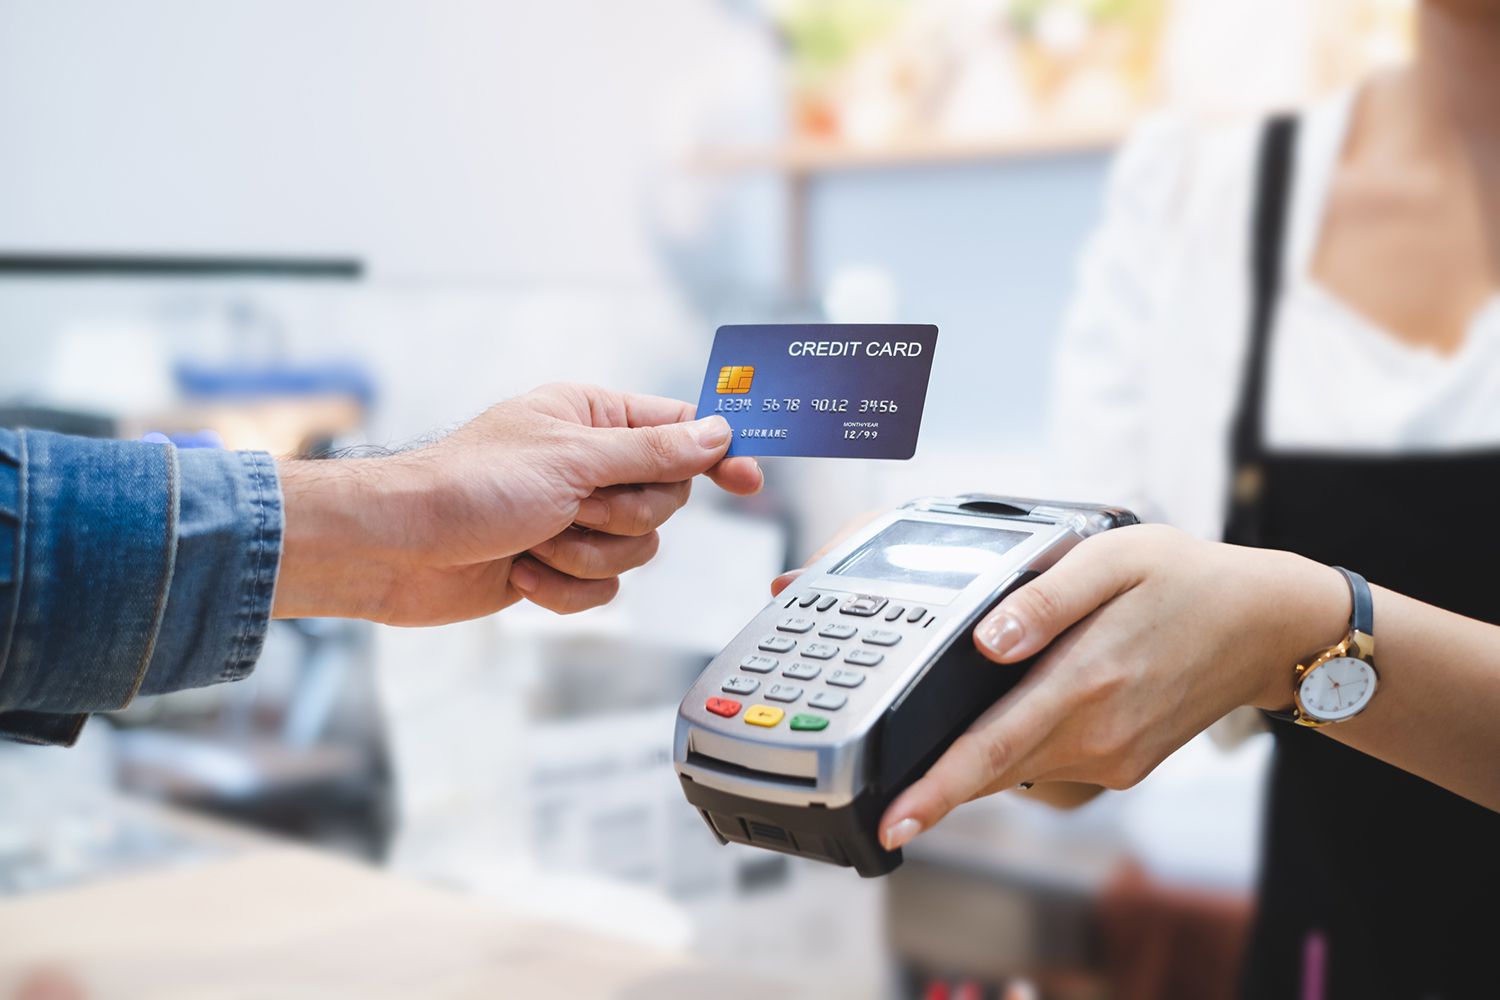 What Does NFC And Contactless Payments Mean?